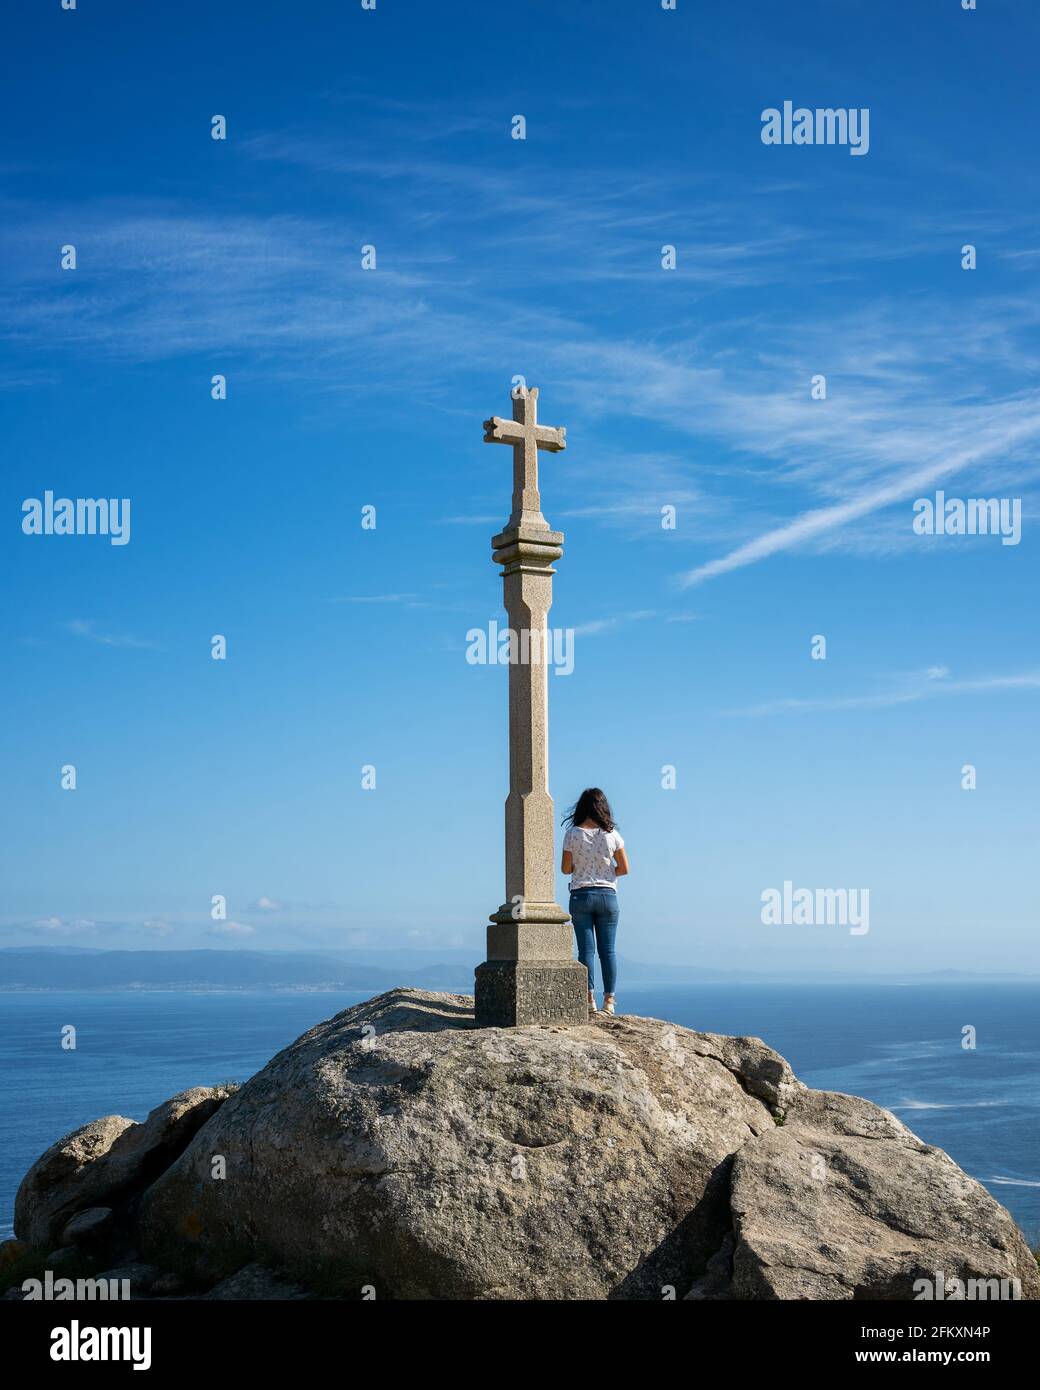 Woman on top a viewpoint rock with a cross sculpture in Finisterre Stock Photo